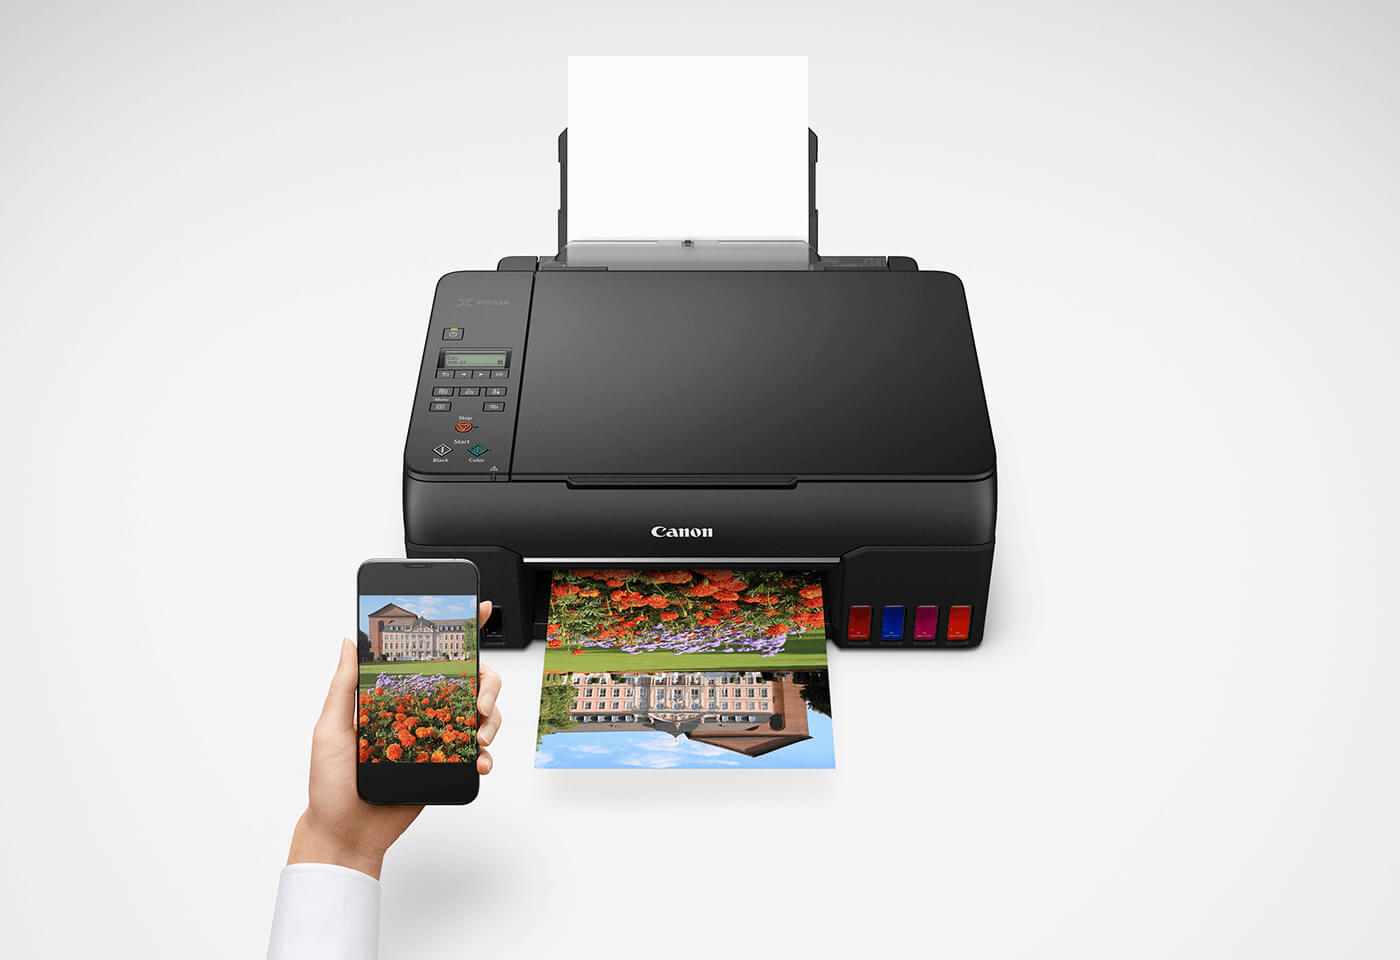 Printing your favourite photos at home has now become a lot easier and cost effective with the Canon G660 MegaTank